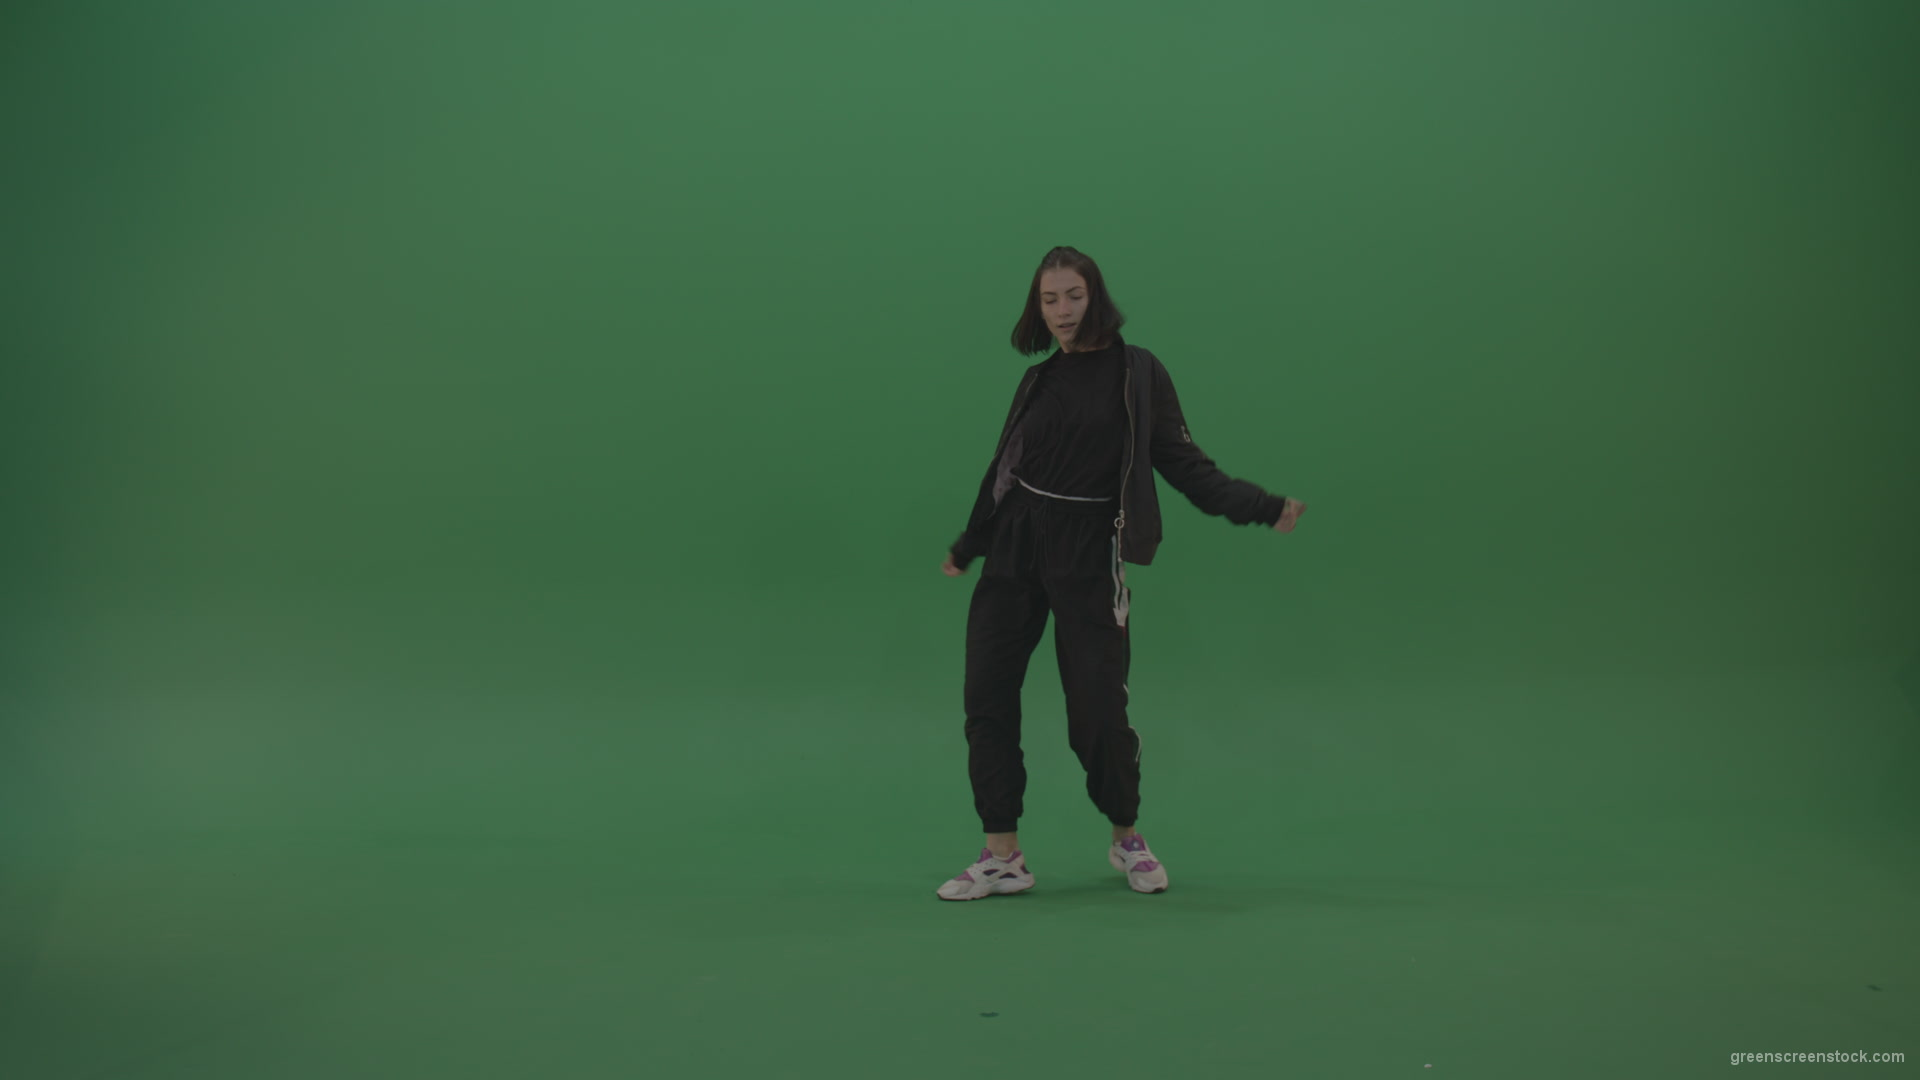 Incredible_Dance_Hip_Hop_Moves_From_Young_Brunette_Female_Wearing_Black_Sweat_Suite_And_White_Trainers_On_Green_Screen_Wall_Background_004 Green Screen Stock